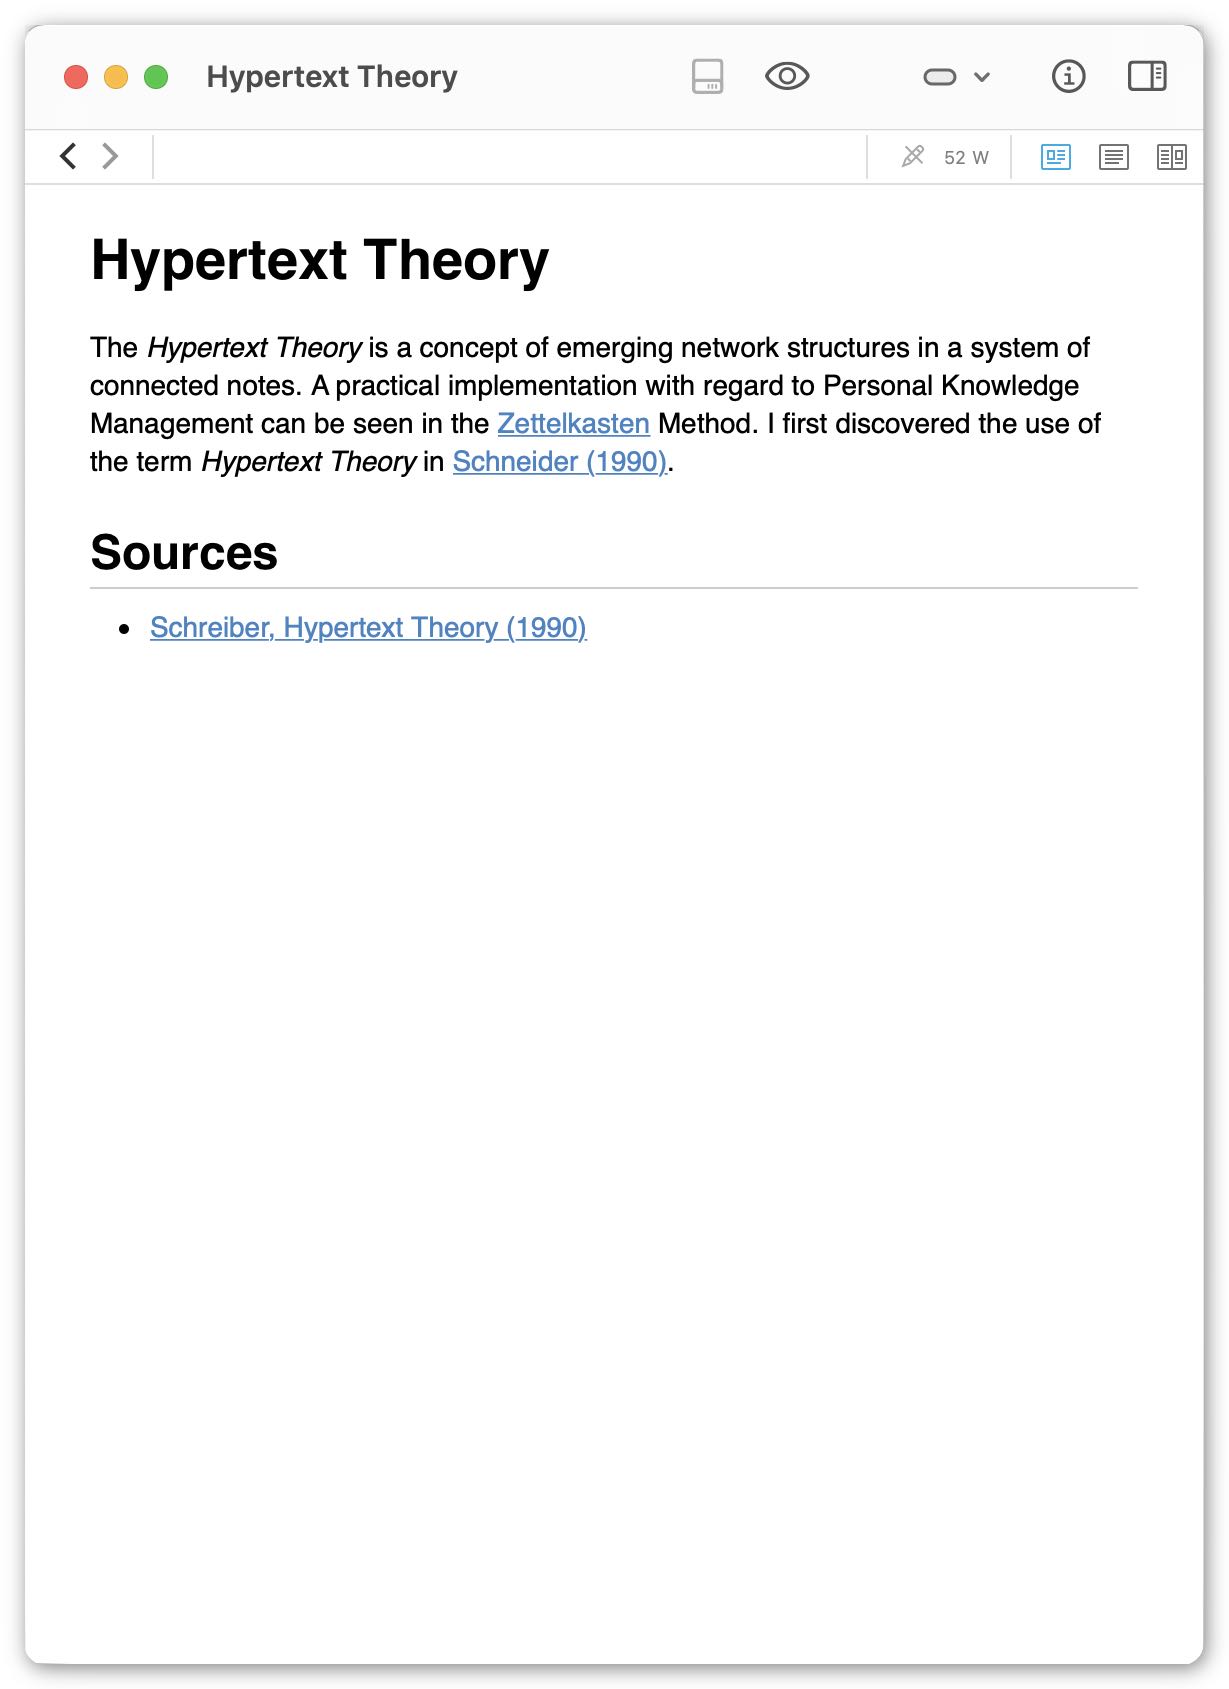 Permanent note on the Hypertext theory (in preview mode).